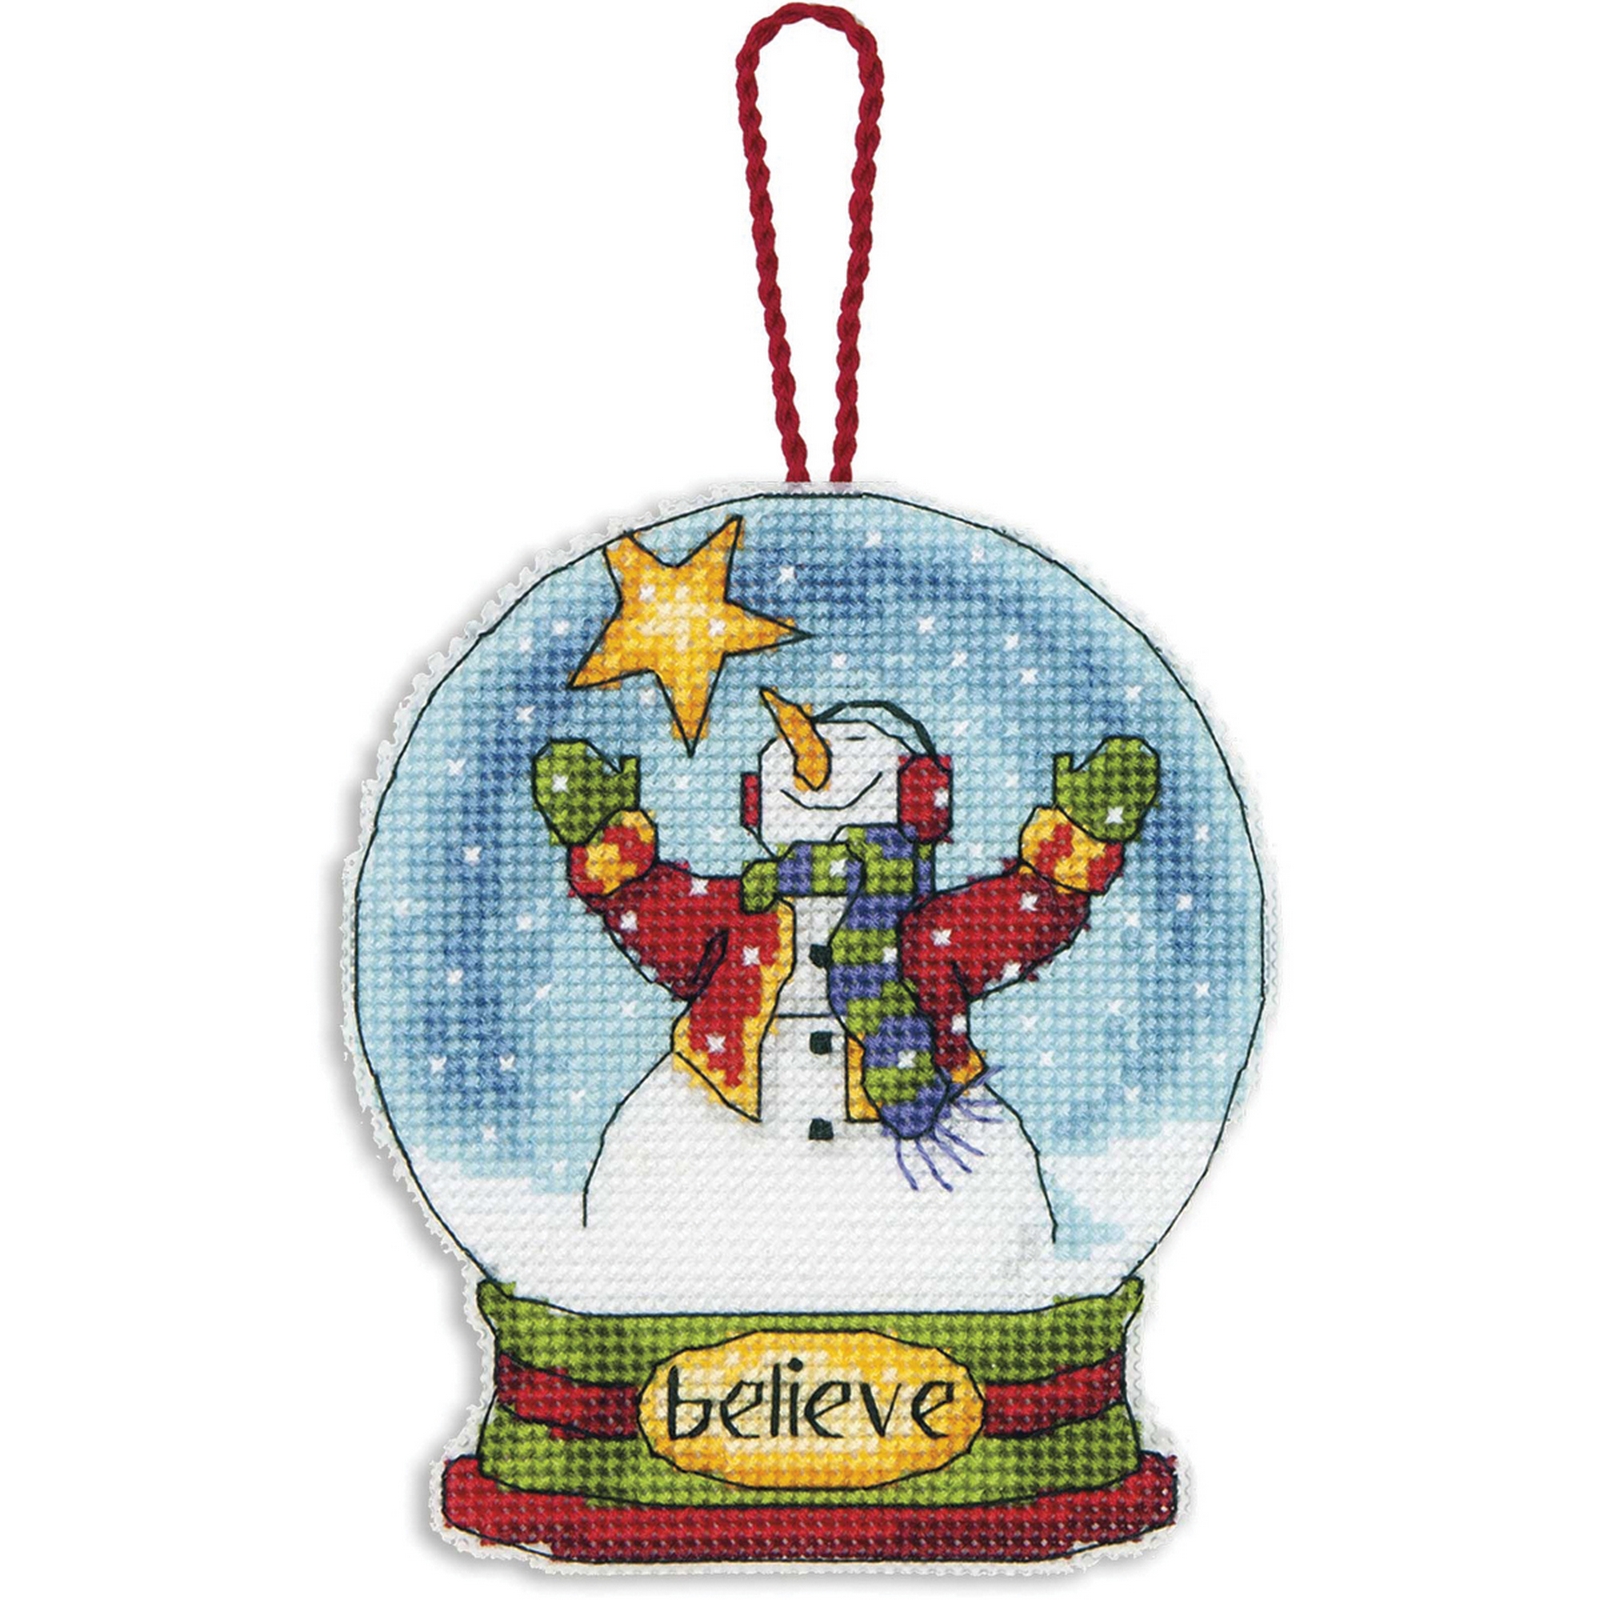 Believe Snowglobe Counted Cross Stitch Kit-3-3/4"X4-1/2" 14 Count Clear Plastic